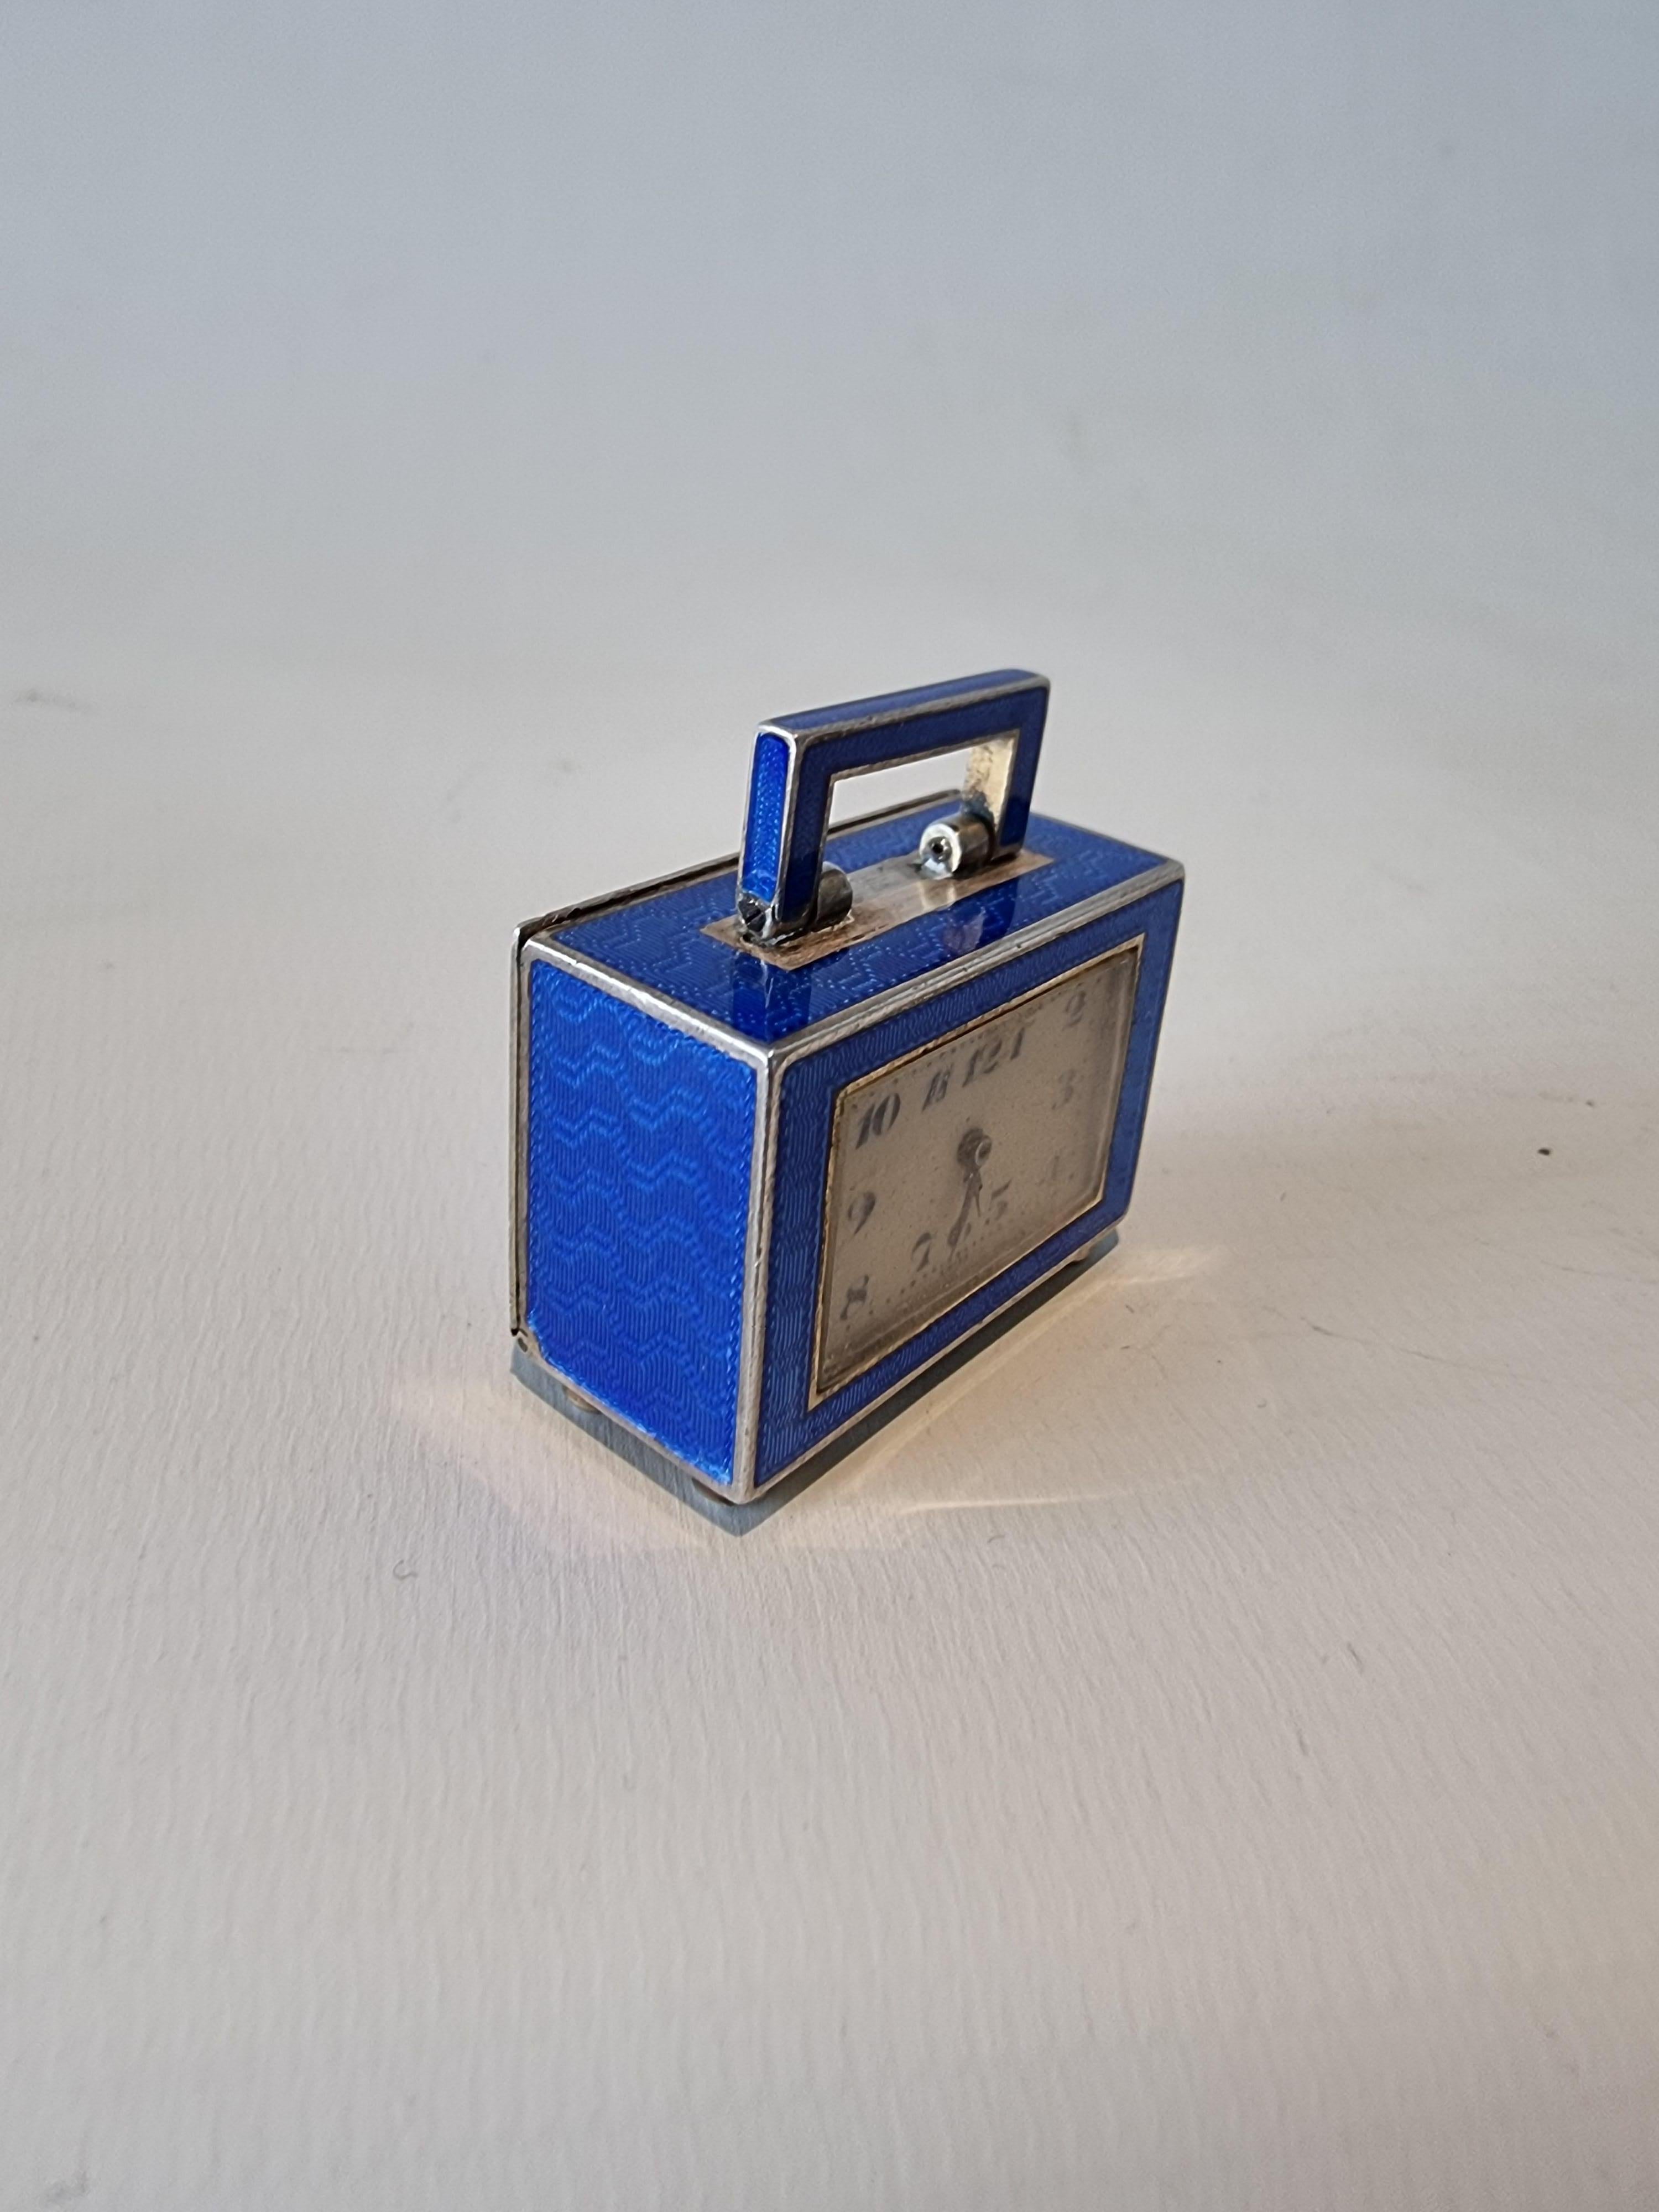 Swiss Silver and Blue sub miniature Guilloche enamel Carriage Clock